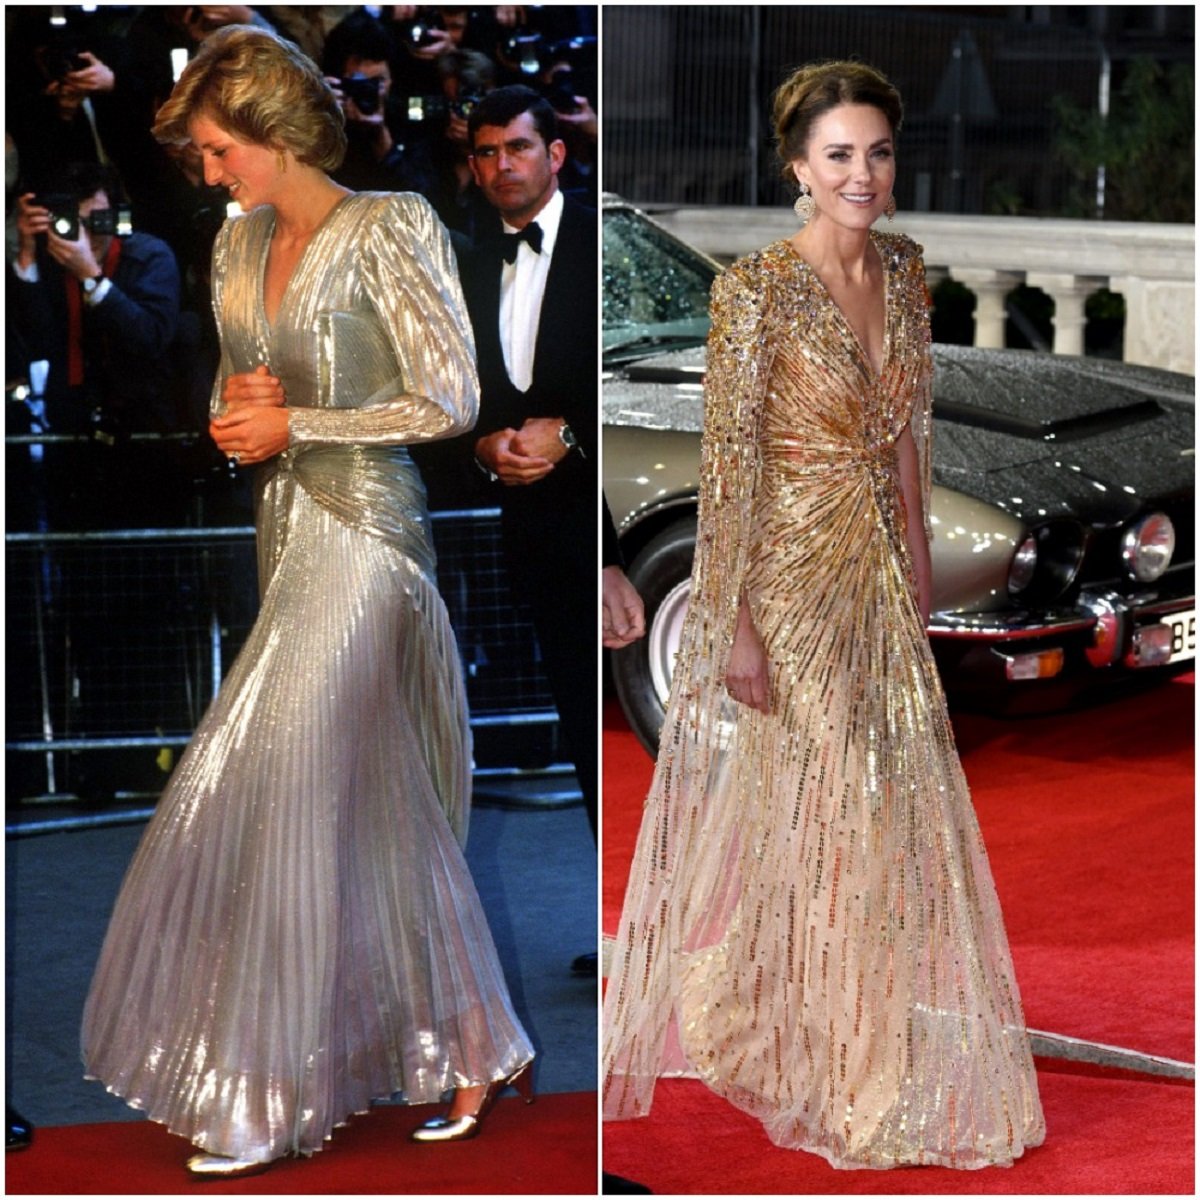 (L): Princess Diana at the 'A View To Kill' premiere, (R): Kate Middleton at the 'No Time To Die' premiere